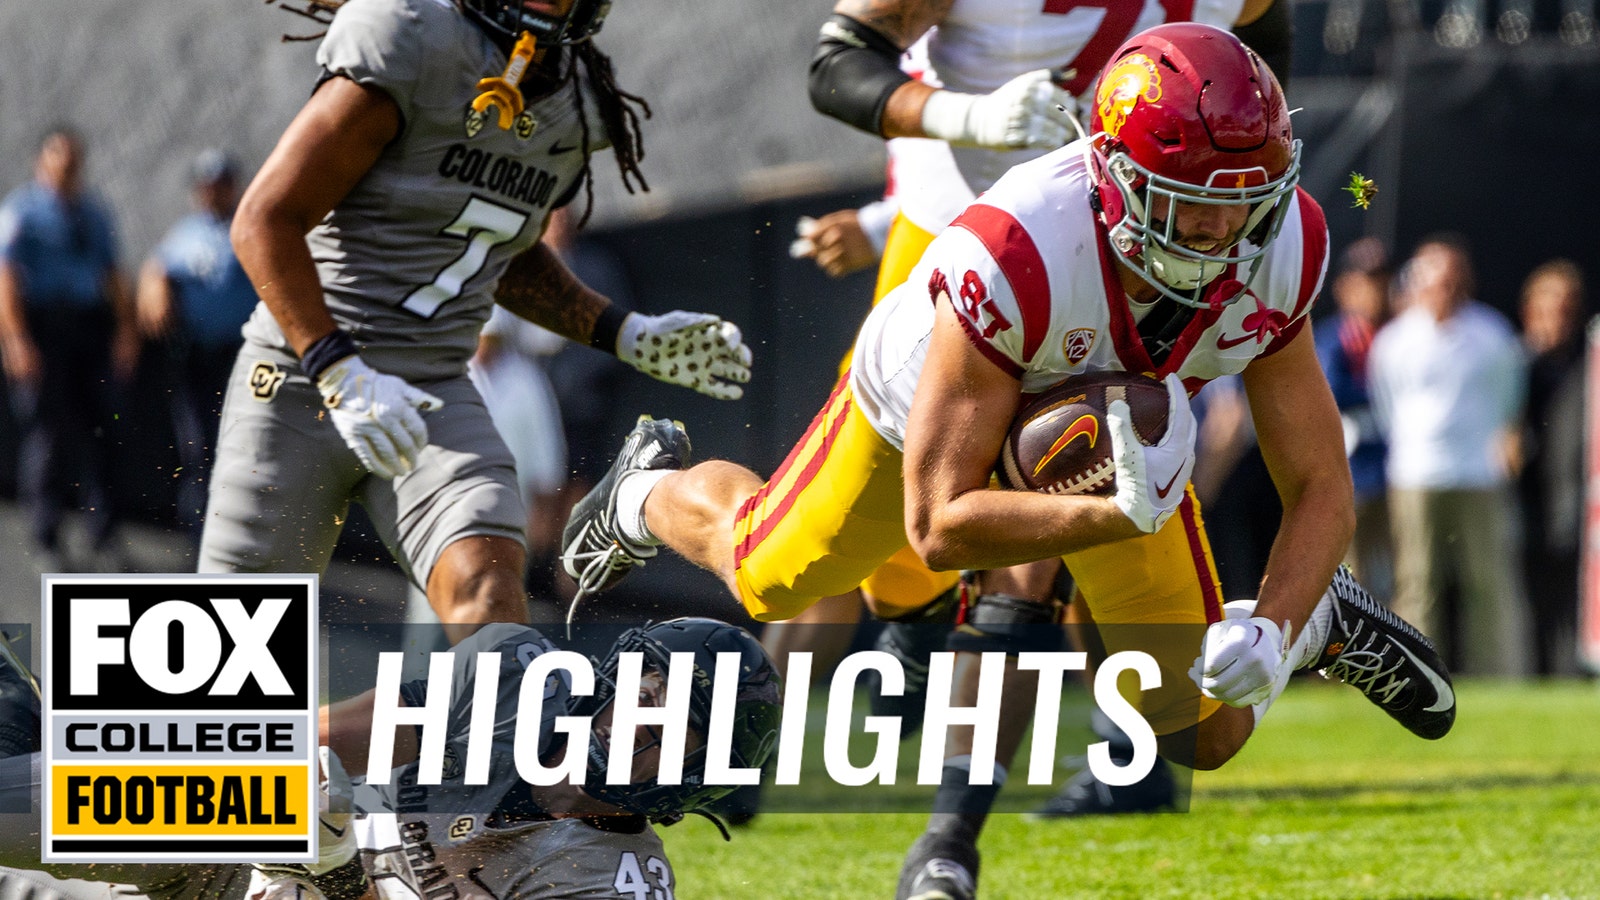 Highlights from USC's win over Colorado